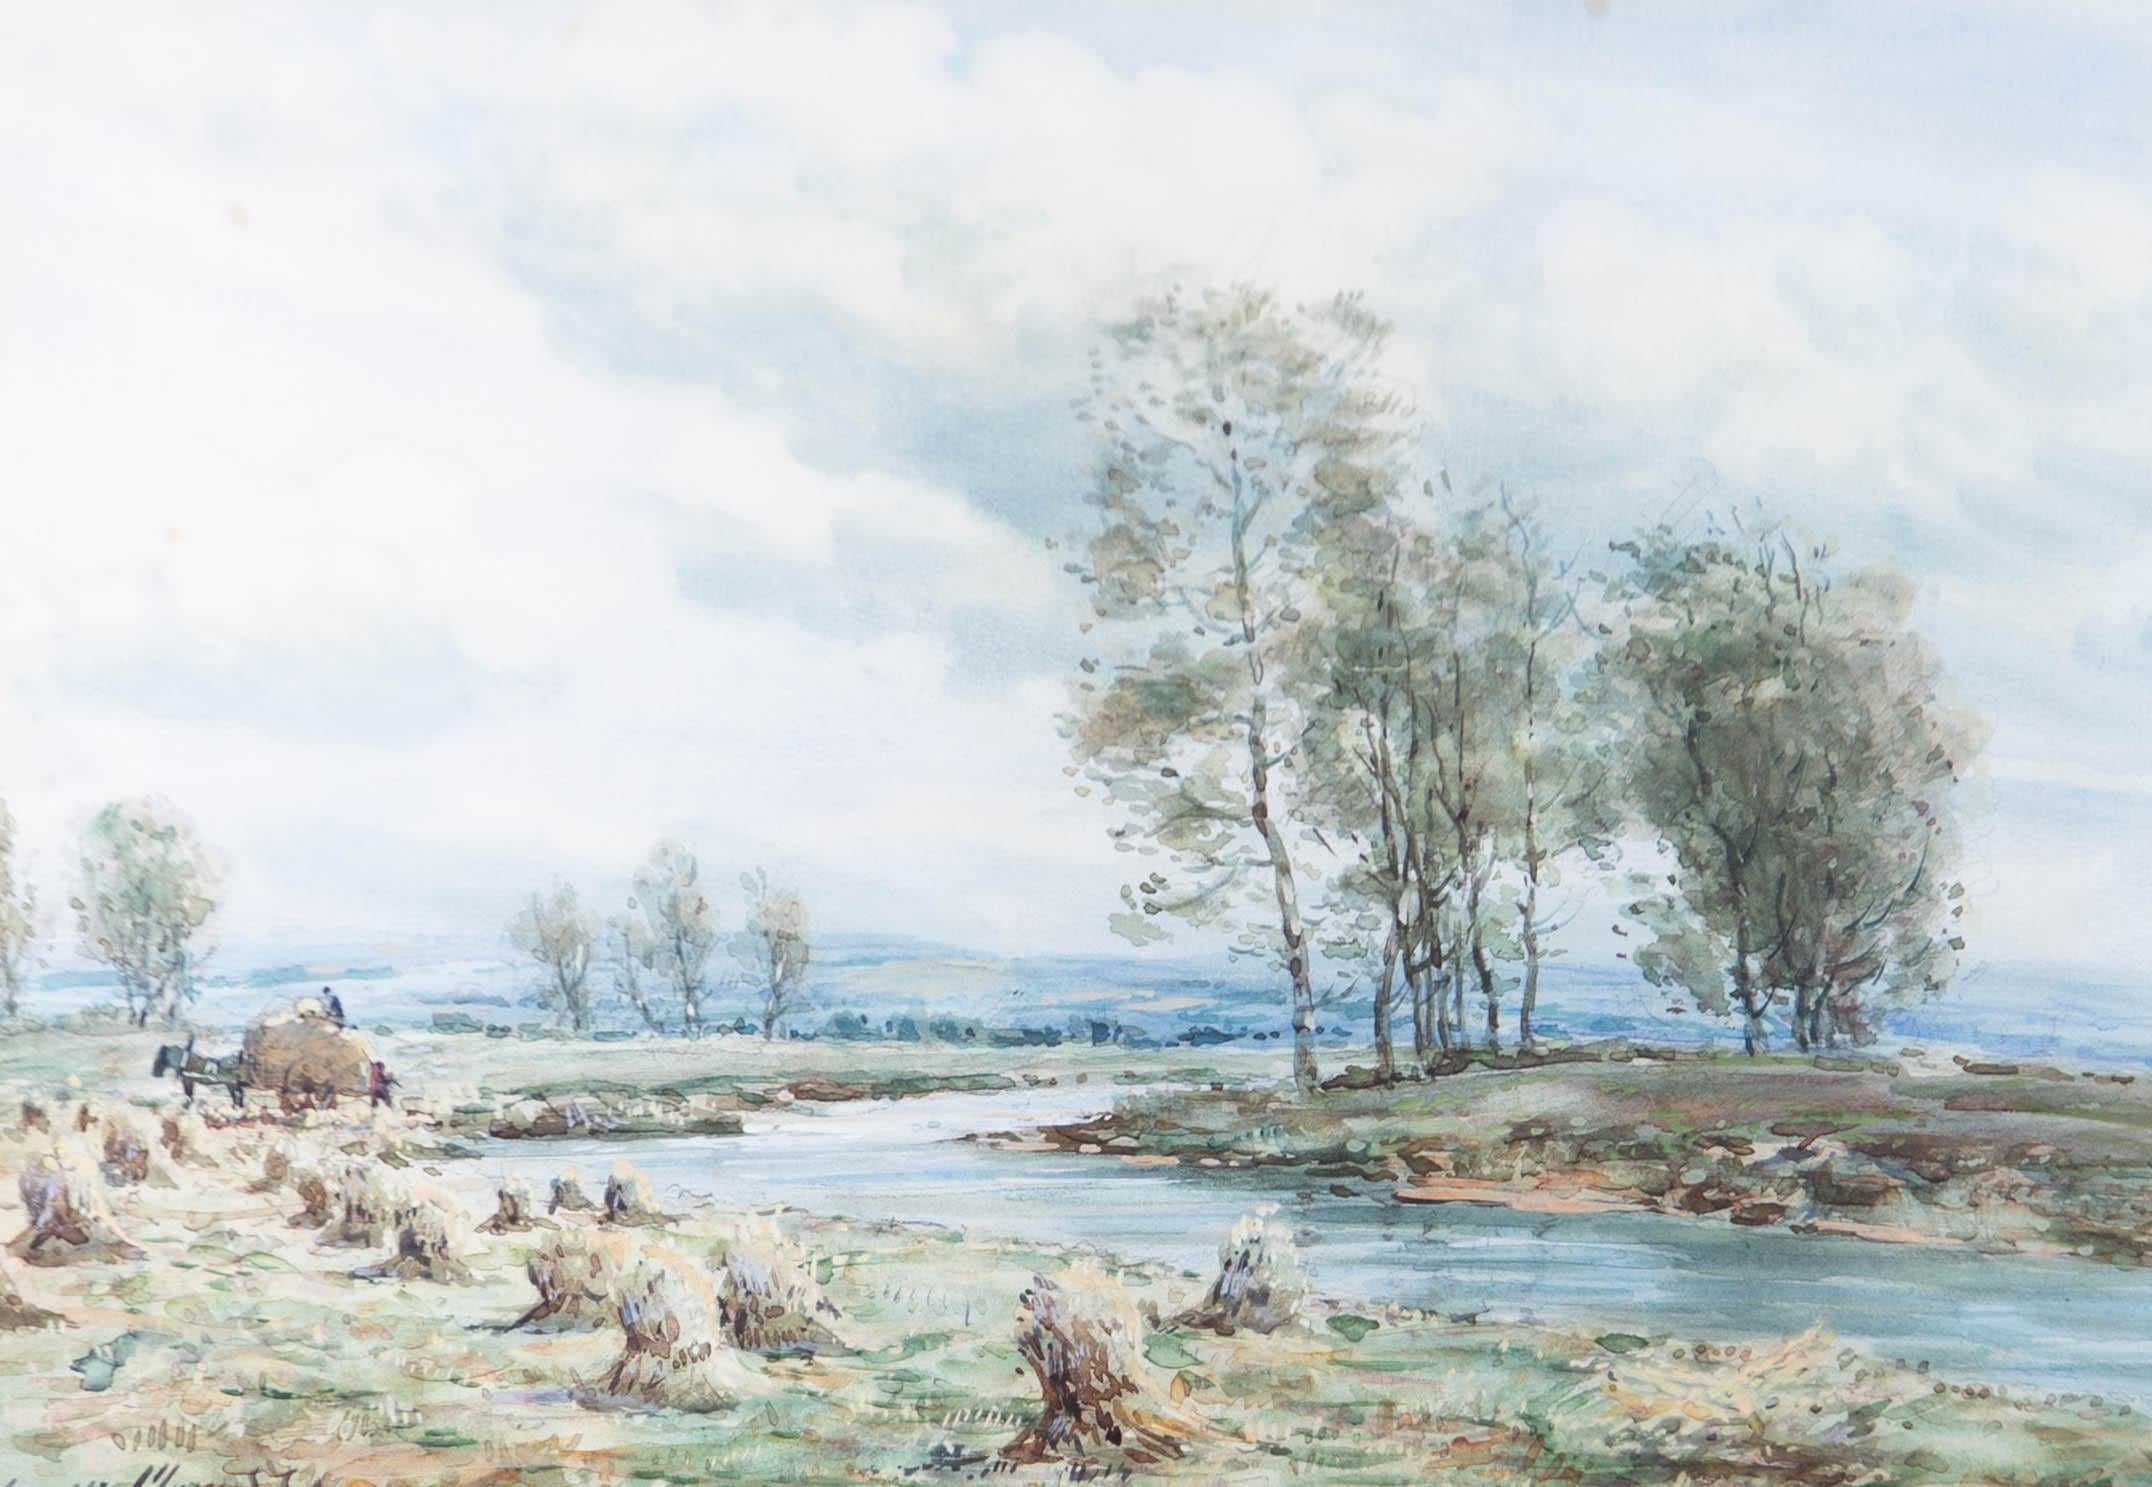 A finely detailed landscape view by the listed artist John Hamilton Glass SSA (fl.1890-1925), depicting an idyllic river landscape. The artist has captured the tranquil beauty of this landscape, in a delicate natural palette. Well presented in a